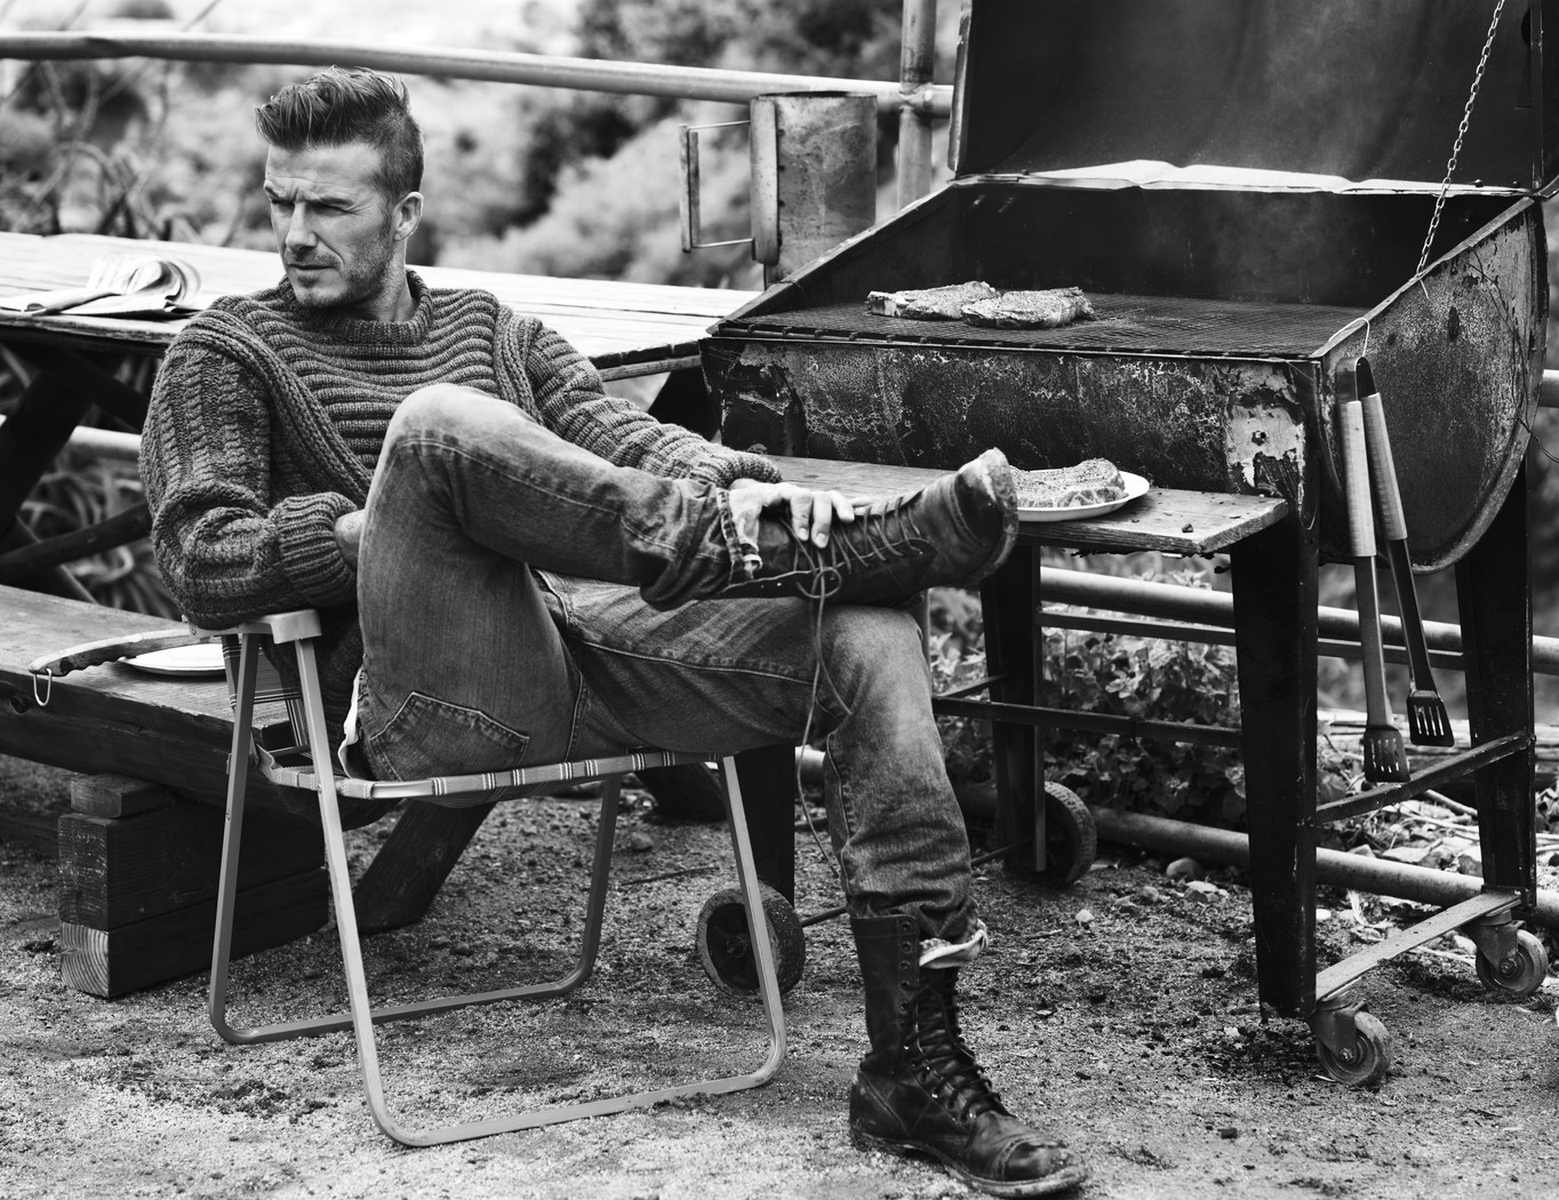 People 1559x1200 David Beckham soccer player model men jeans looking into the distance monochrome celebrity